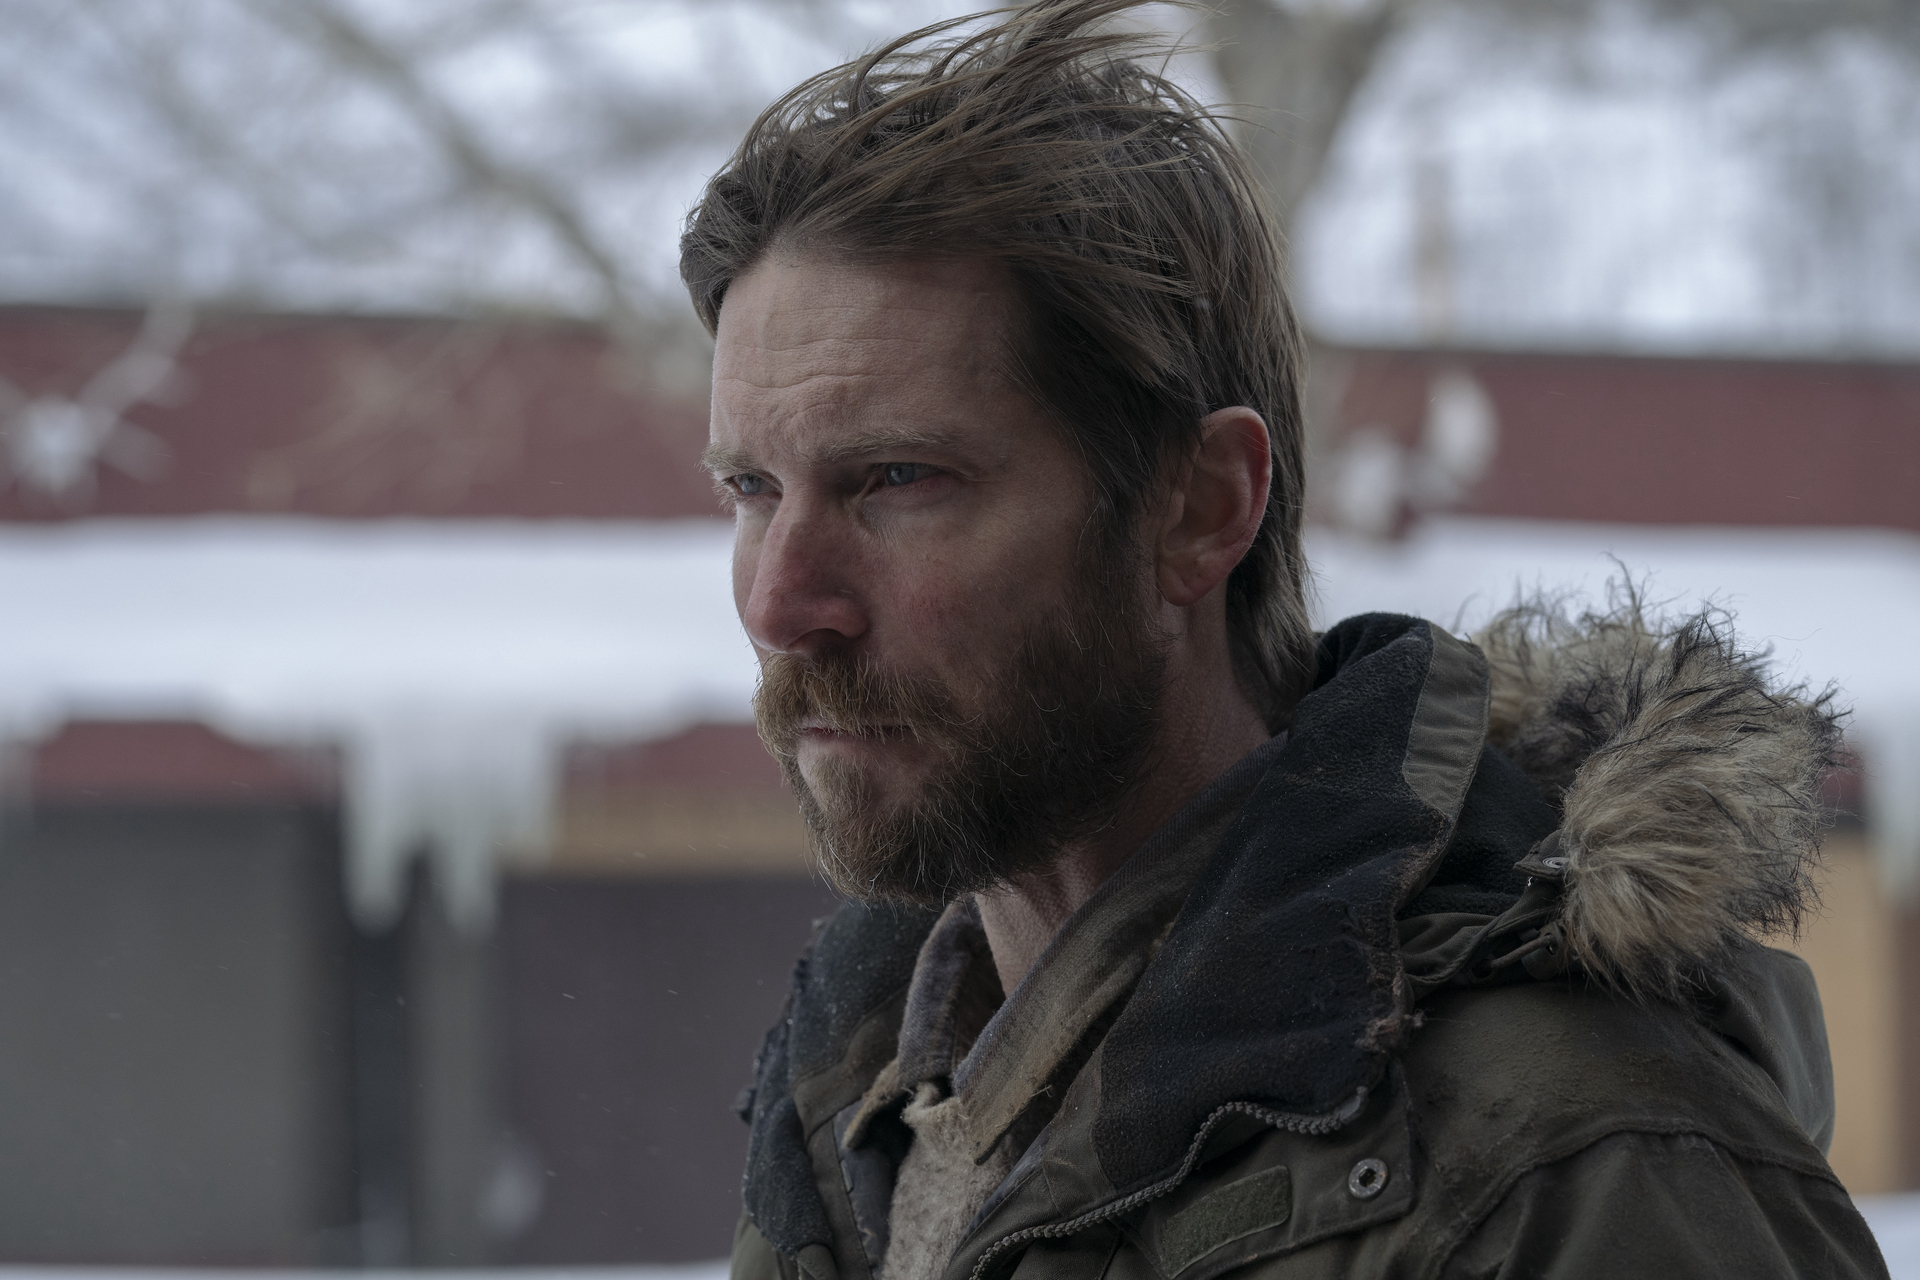 Troy Baker in Craig Mazin and Neil Druckmann's post-apocalyptic horror science-fiction action adventure drama adaptation series, The Last of Us, Season 1 Episode 8